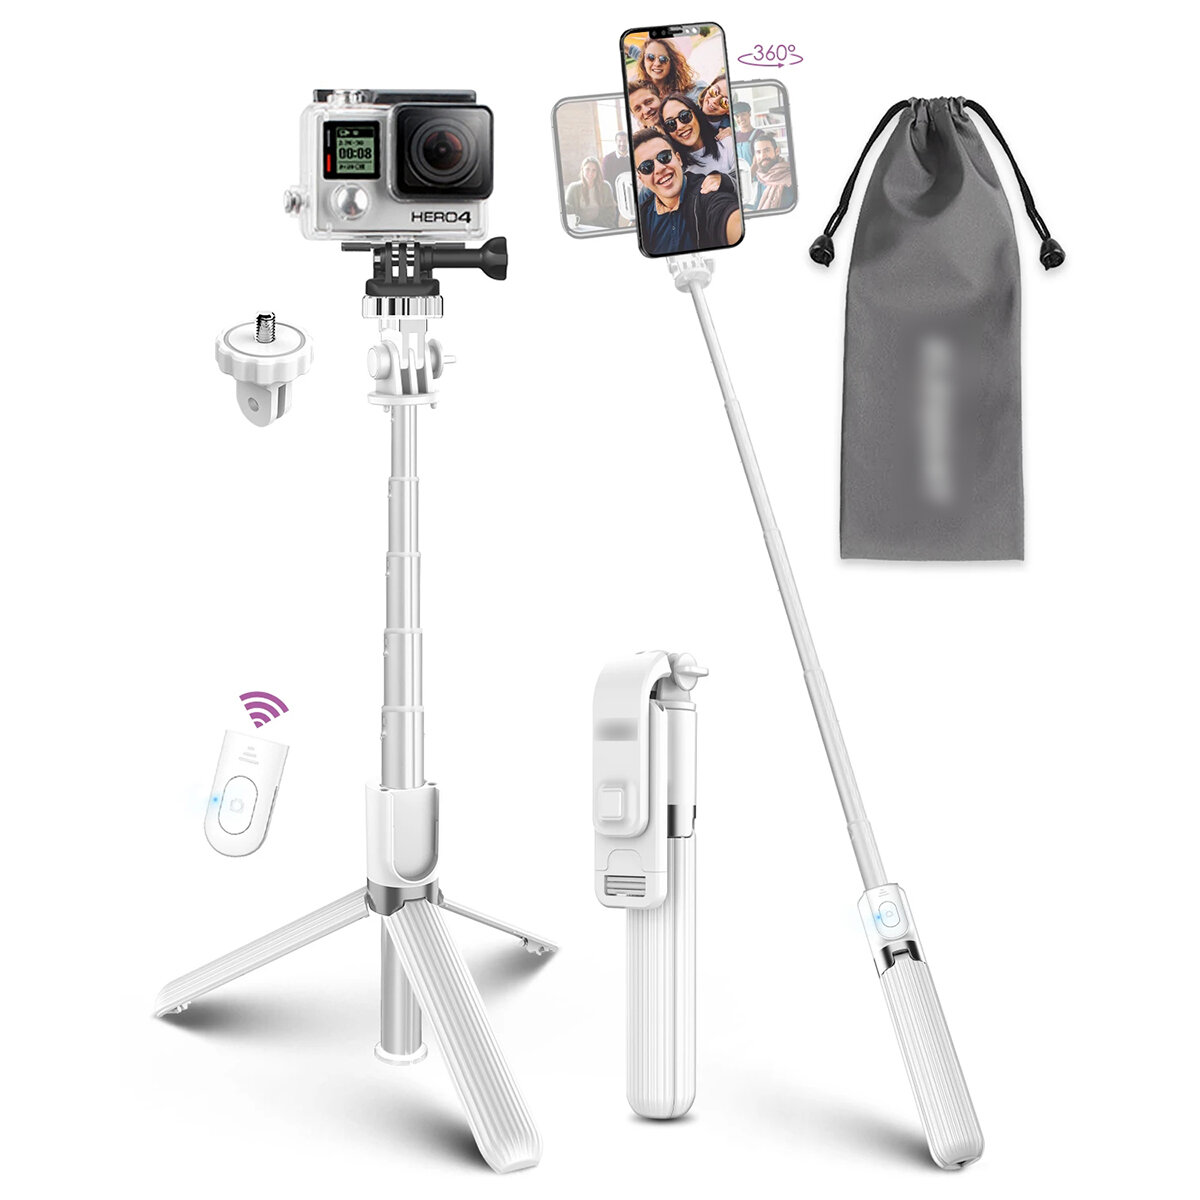 

ELEGIANT Selfie Stick Lightweight Aluminum All in One Extendable bluetooth Tripod with Remote Control for iPhone Galaxy